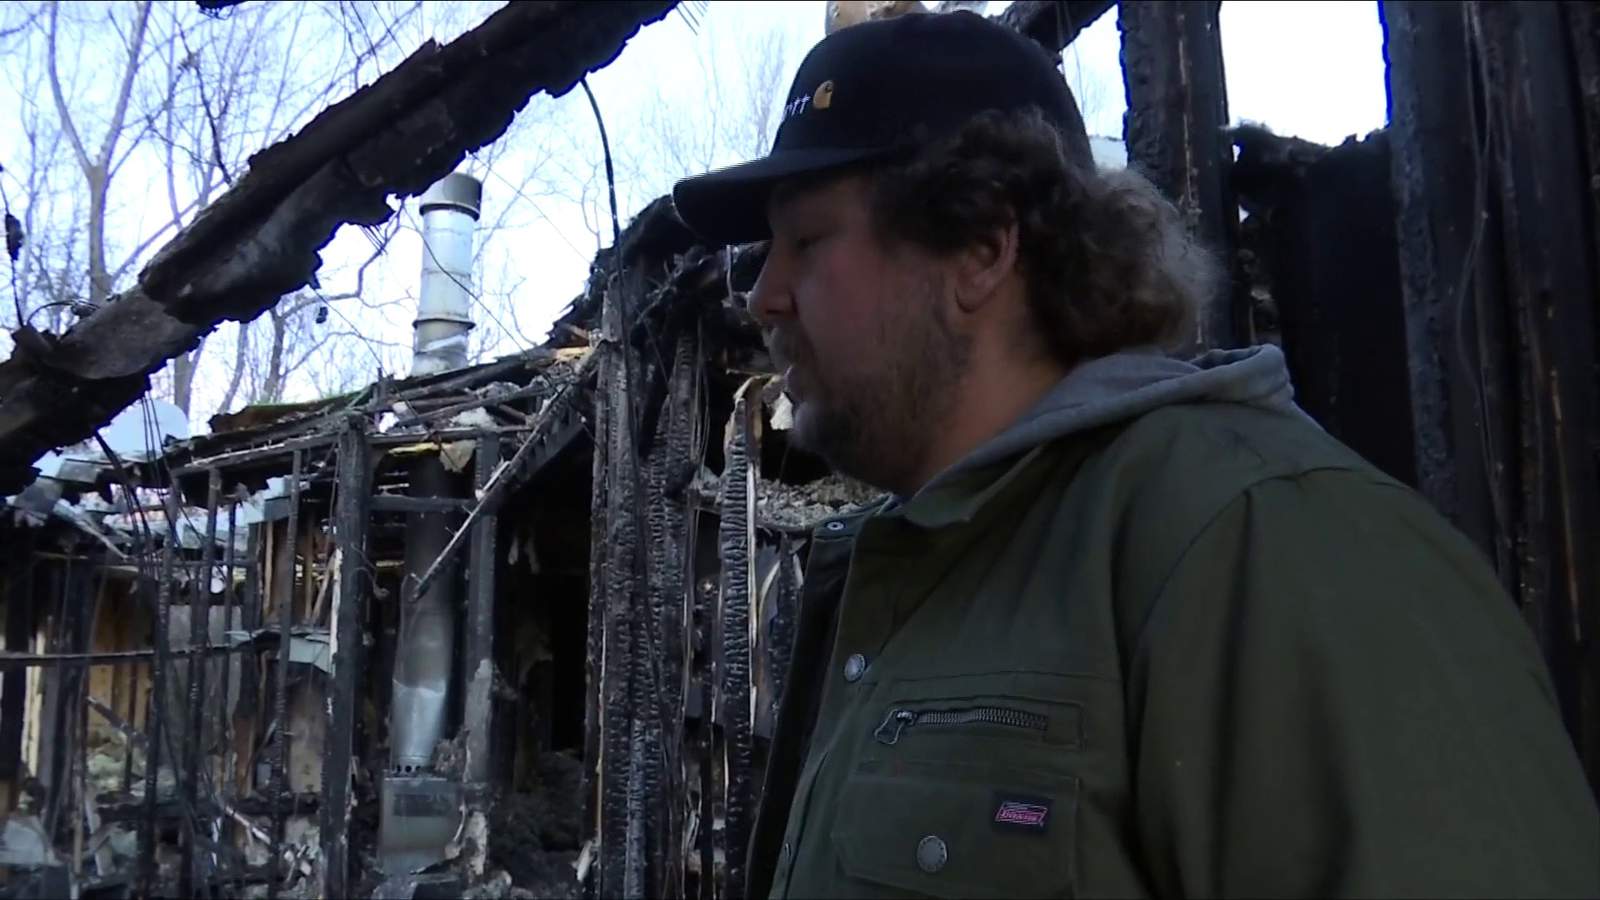 ‘An out of body experience’: Volunteer firefighter loses everything in house fire